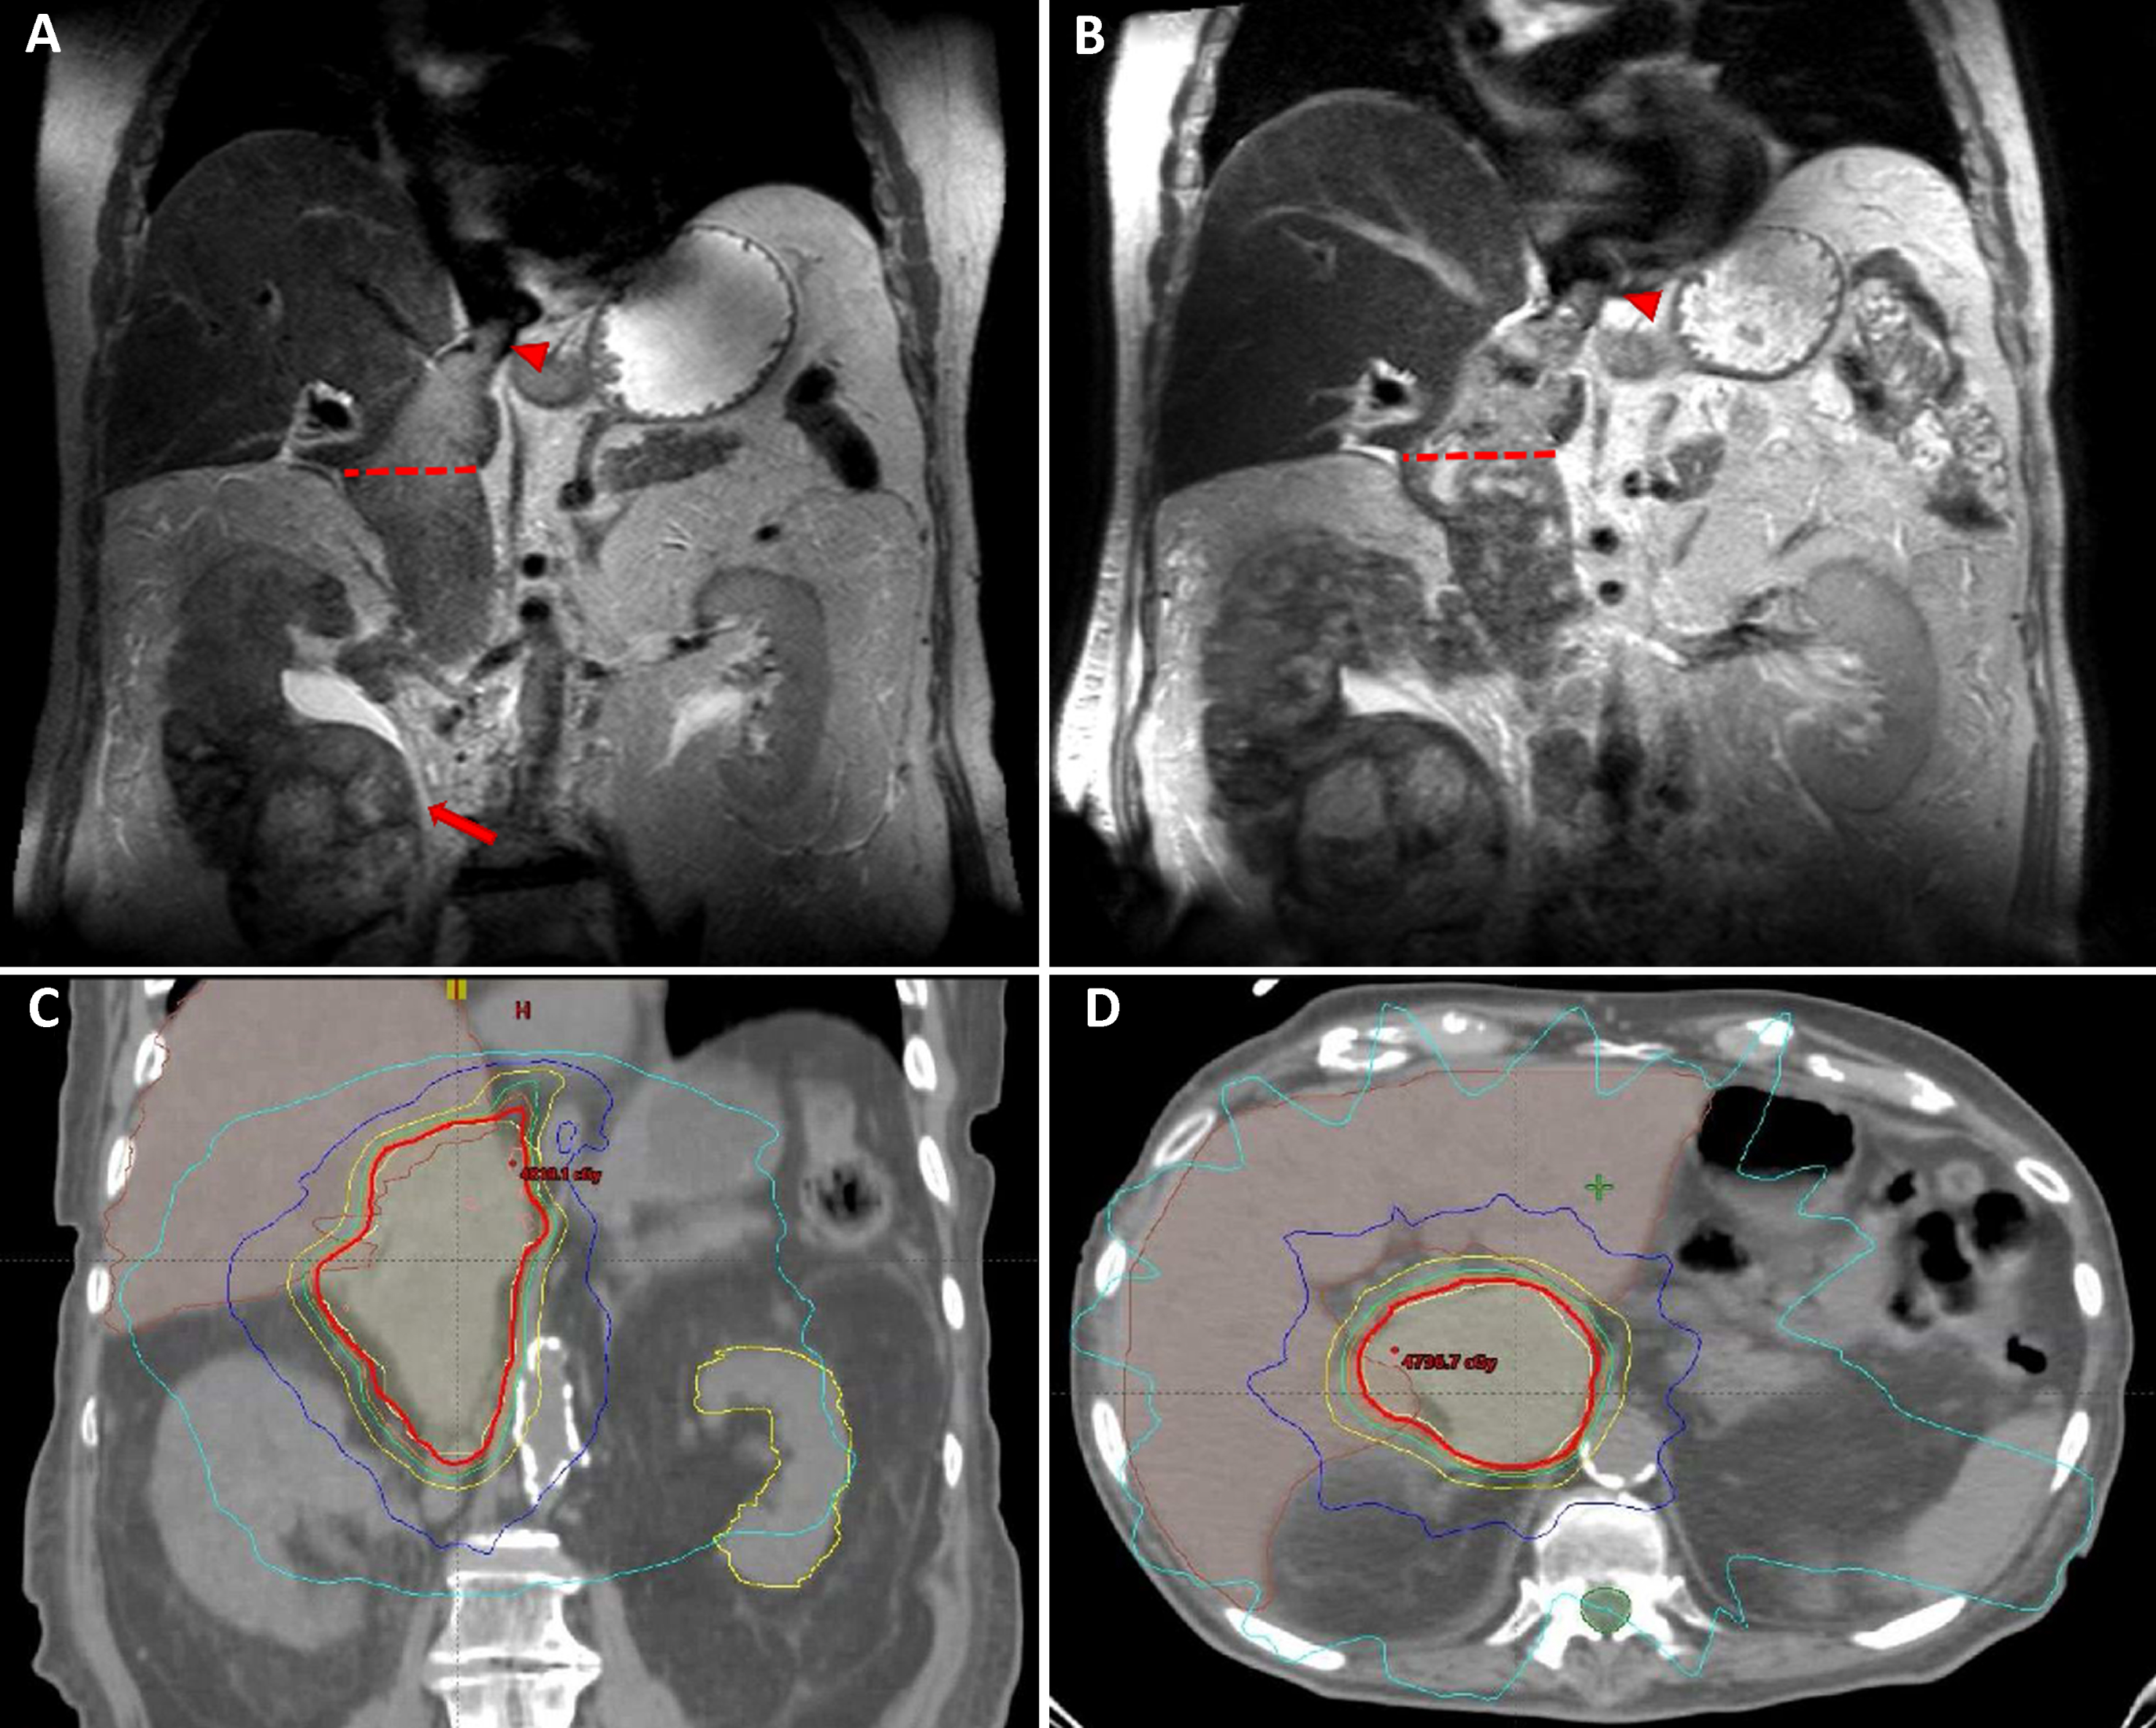 MRI images of an 83 y/o man with right renal mass (arrow) and level IV tumor thrombus (arrow head), with a maximal diameter of 49 mm (dotted line) (A). Progressive increase in tumor thrombus size and enhancement, measuring 57 mm (dotted line and arrow head) (B). SBRT (5×9 Gy) was planned covering the thrombus area – CT images demonstrate radiation planning (red contour representing the 95% iso-dose line) (C-D).